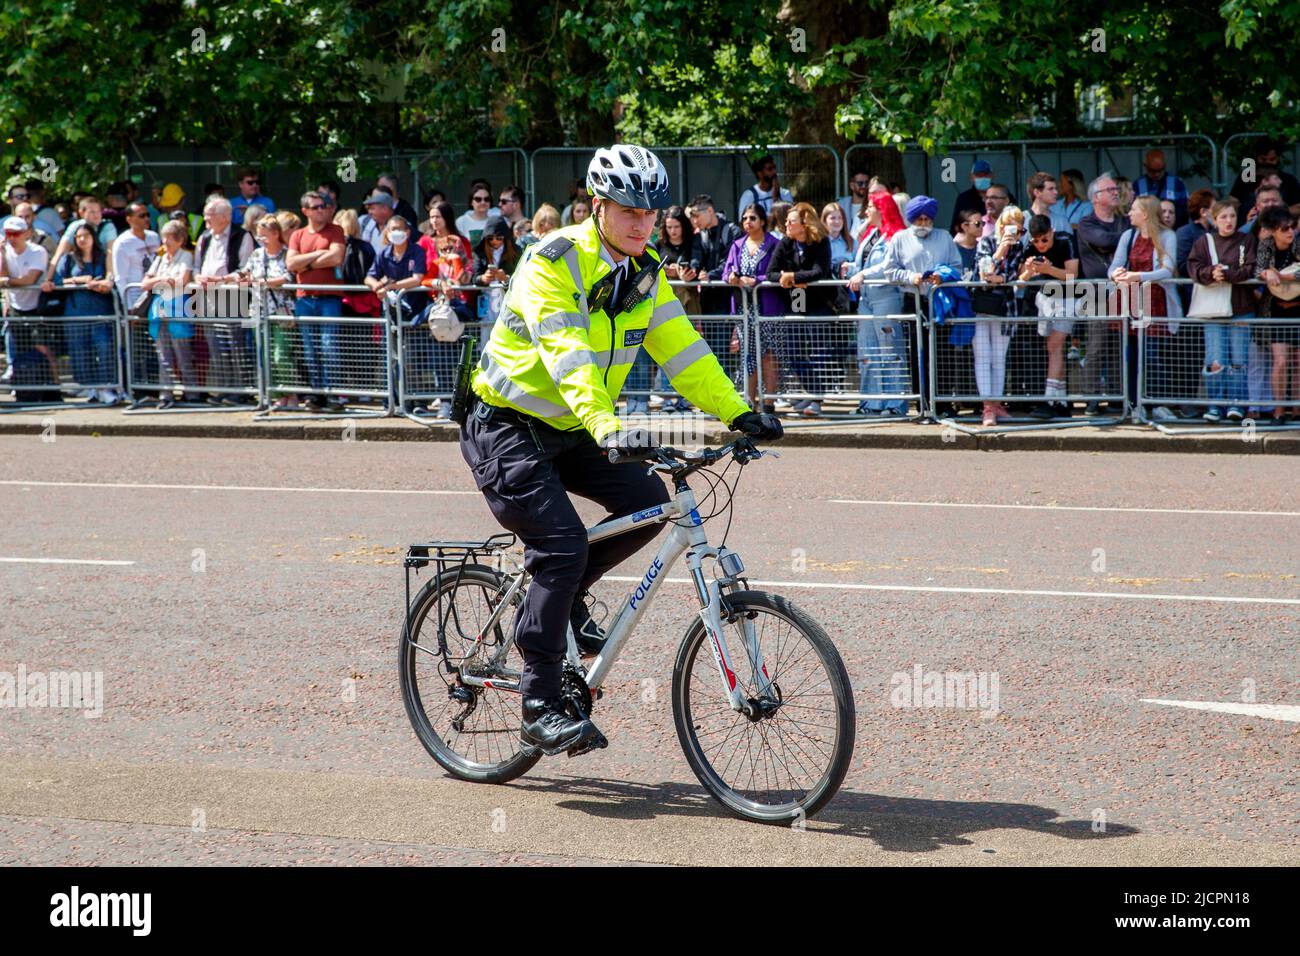 Police officer on bicycle in London, England, United Kingdom on Wednesday, May 18, 2022.Photo: David Rowland / One-Image.com Stock Photo